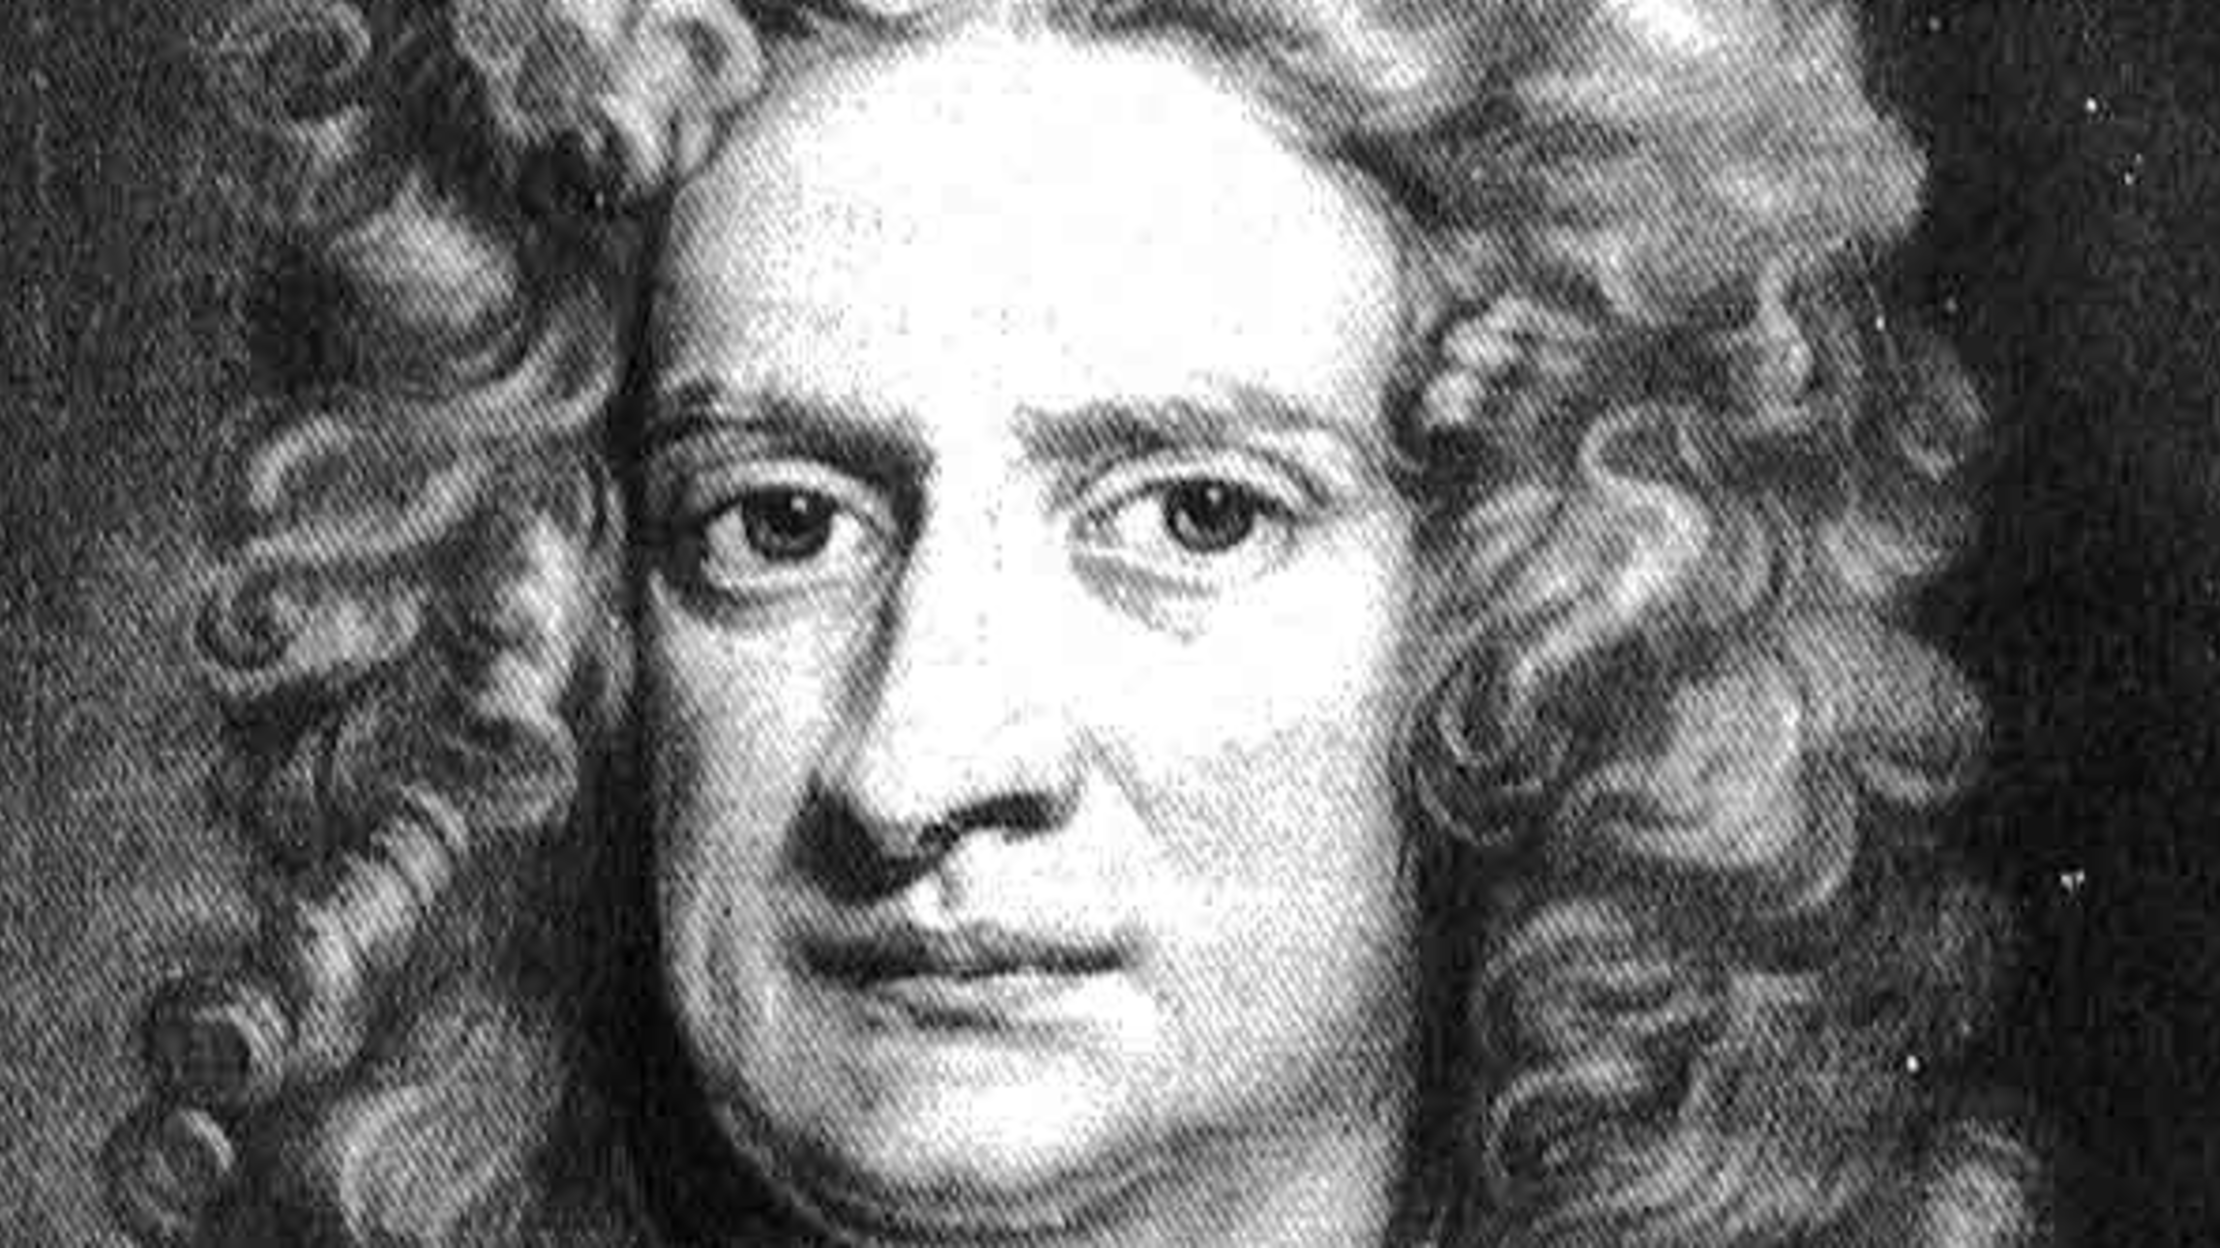 isaac newton known for